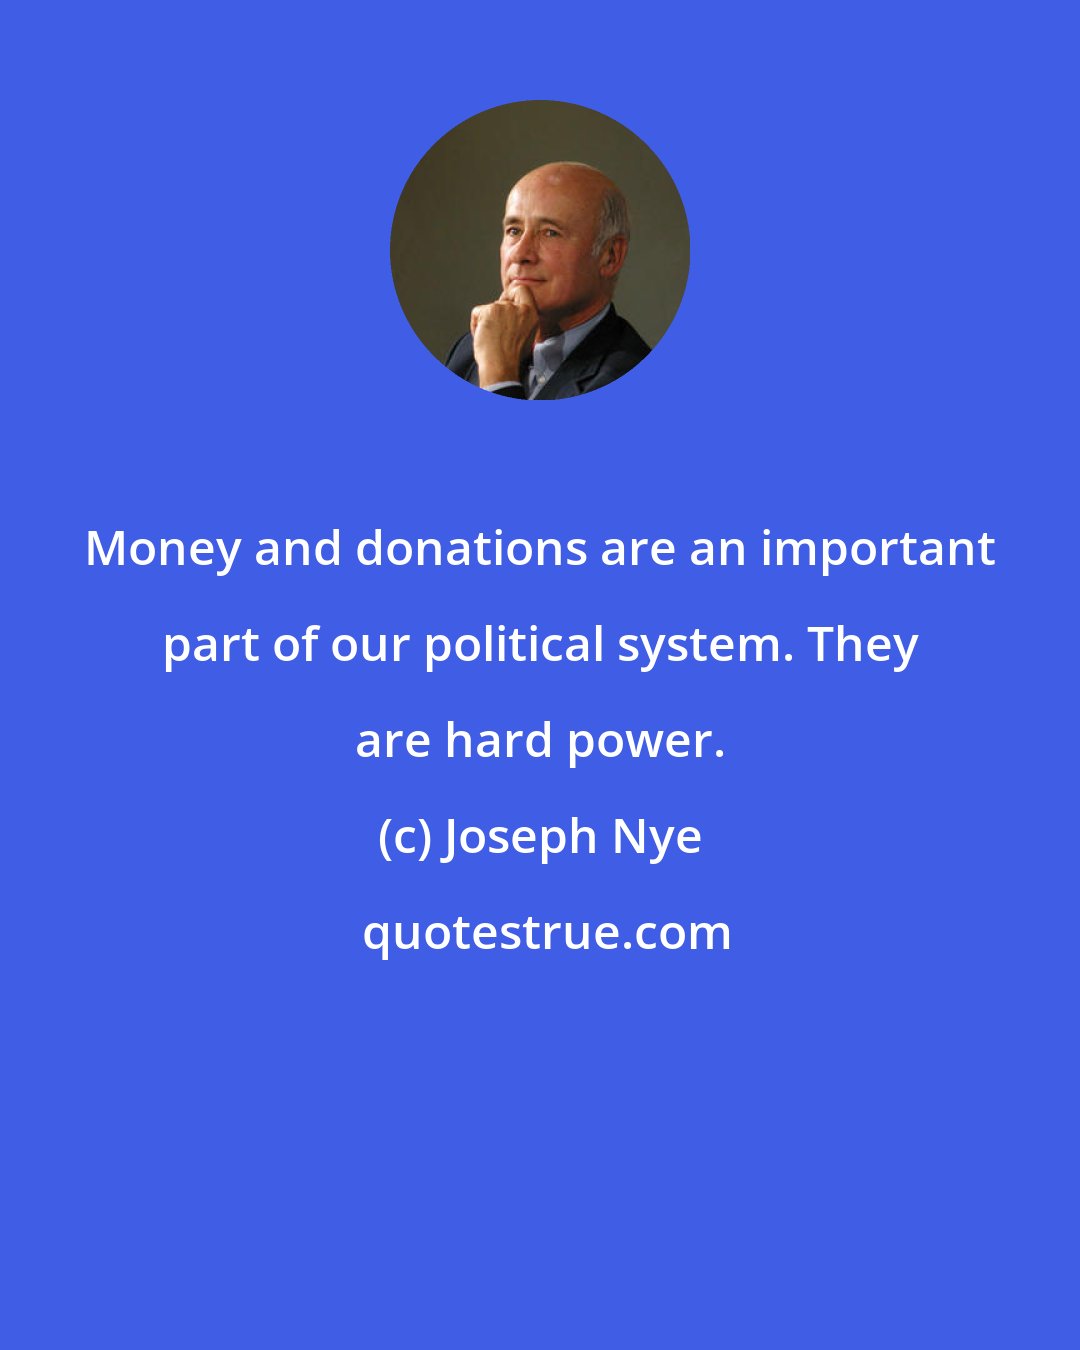 Joseph Nye: Money and donations are an important part of our political system. They are hard power.